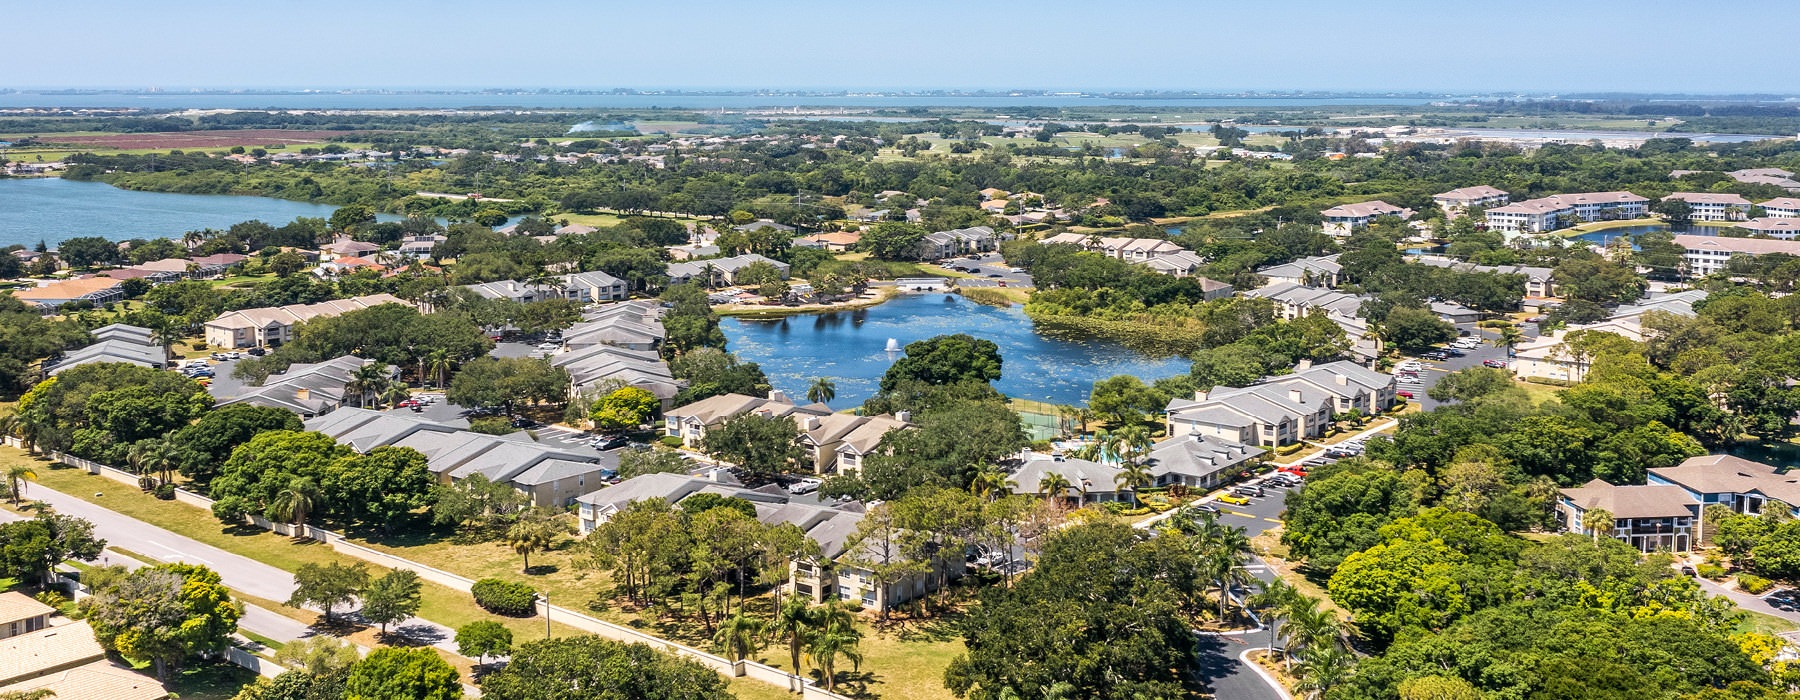 aerial view of Sawgrass Cove and surrounding neighborhood